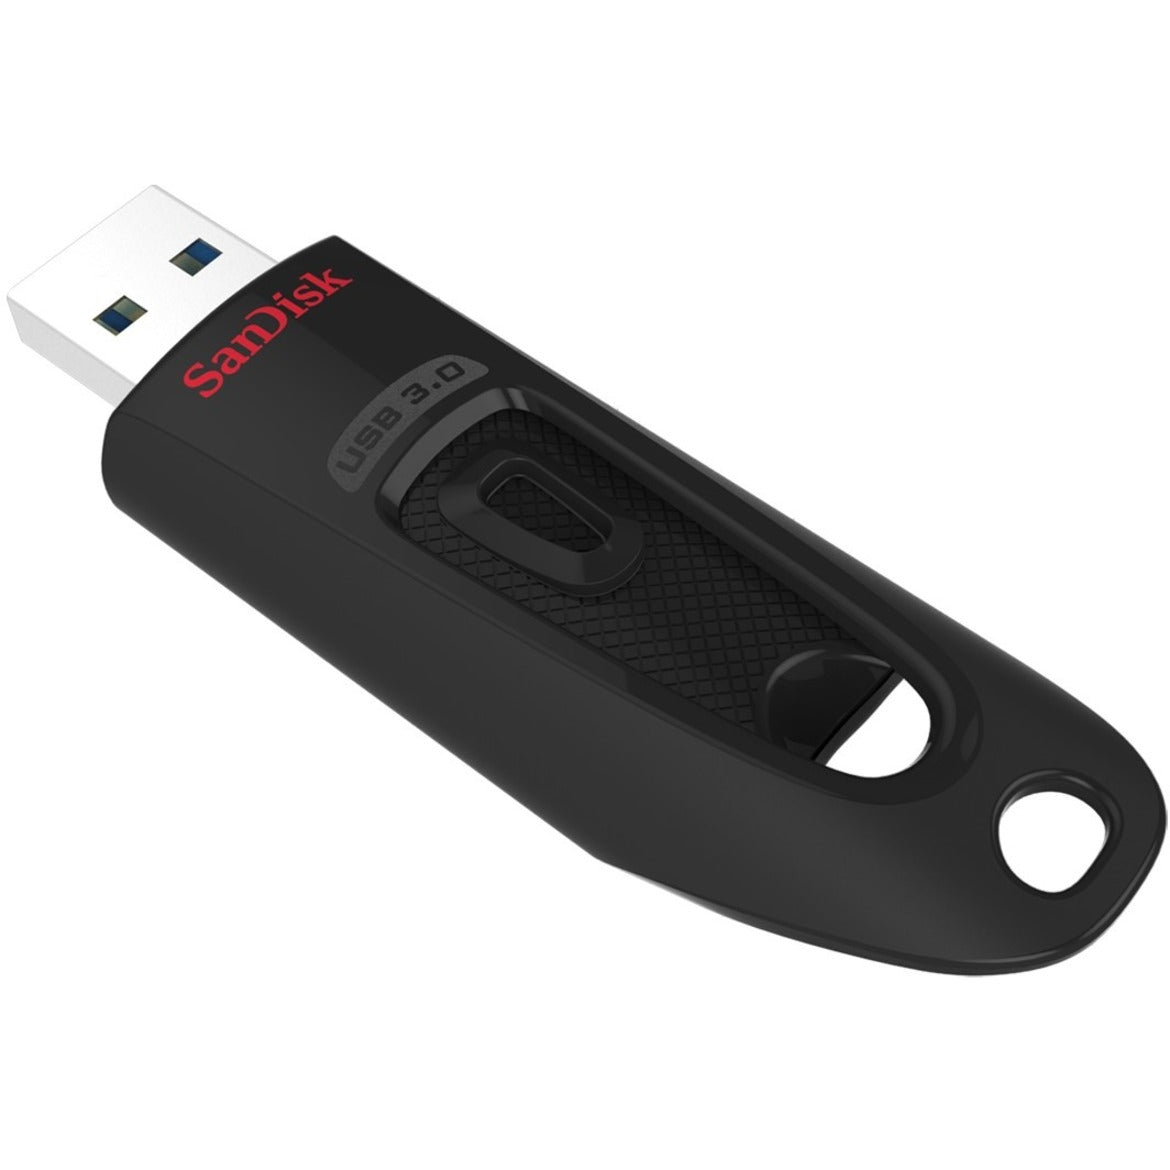 SanDisk SDCZ48-128G-A46 Ultra USB 3.0 Flash Drive - 128GB, High-Speed Data Transfer and Storage